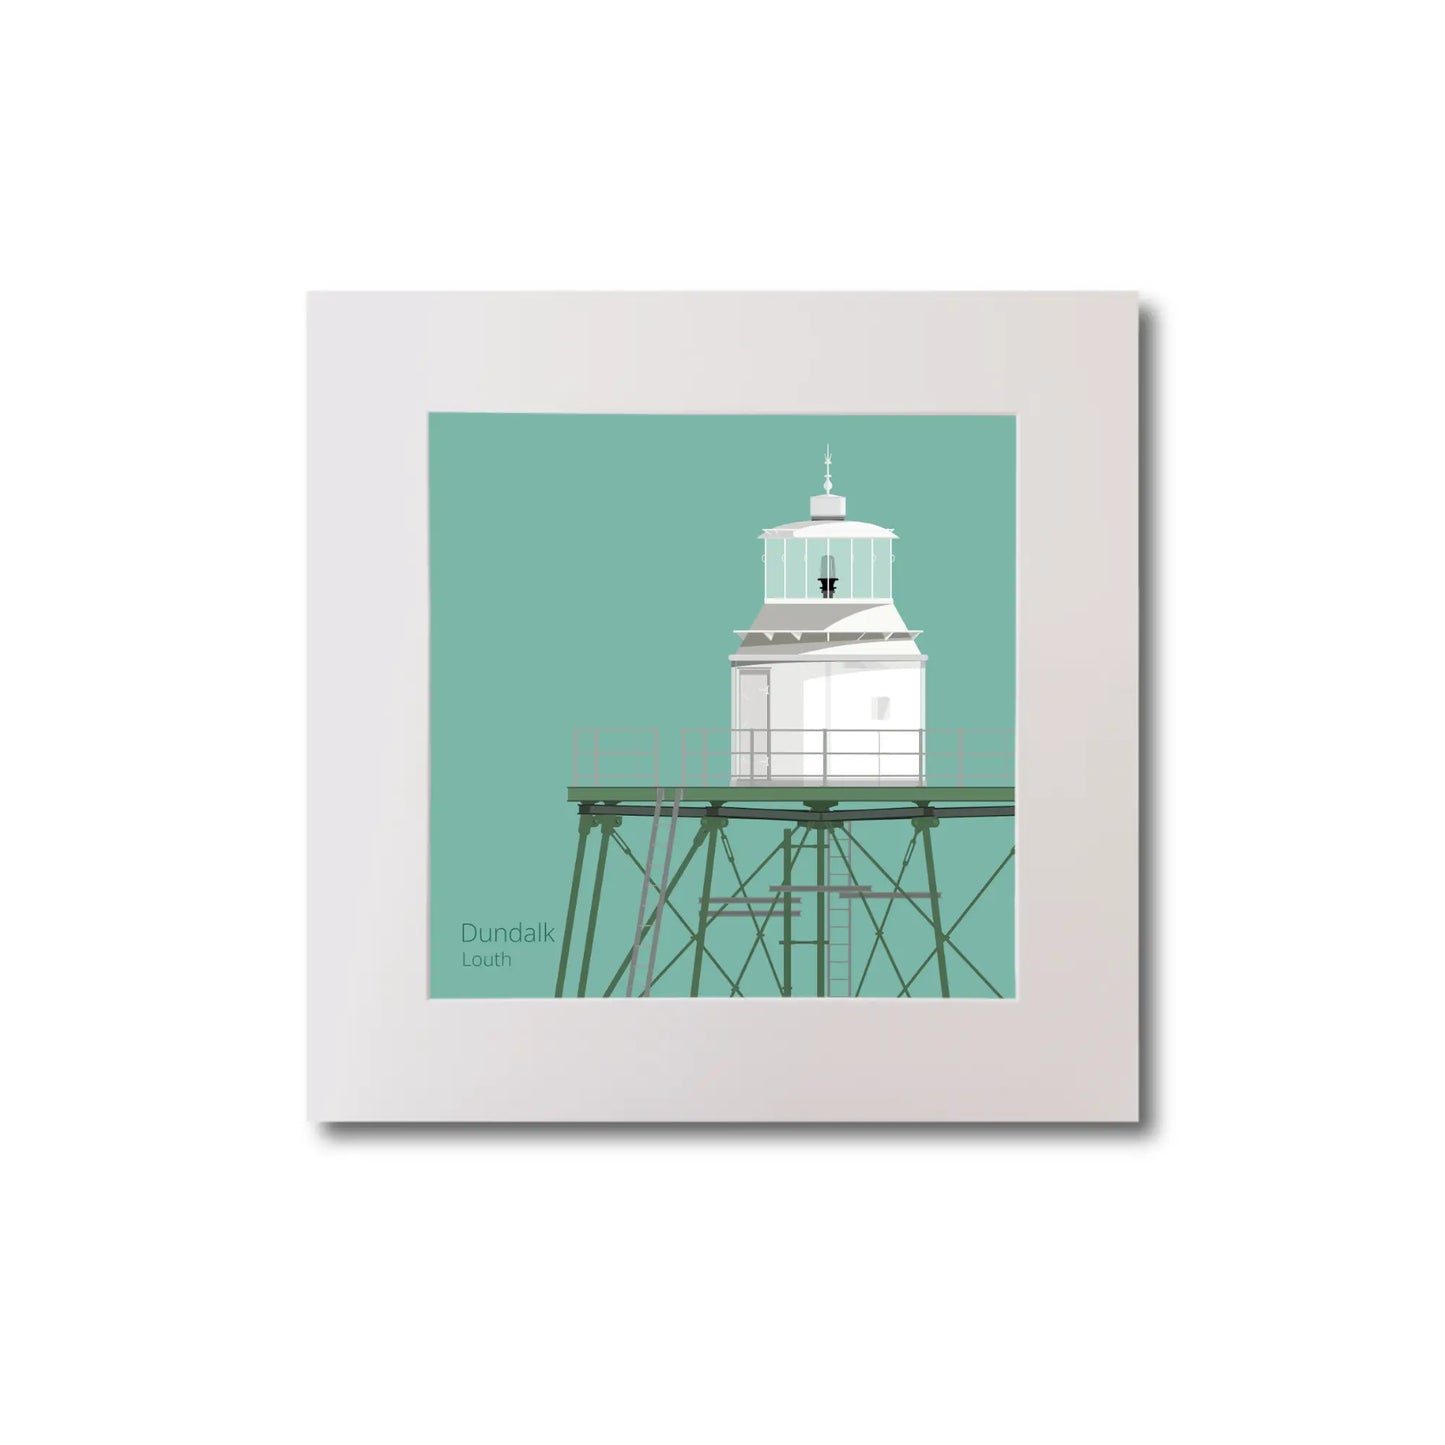 Illustration  Dundalk lighthouse on an ocean green background, mounted and measuring 20x20cm.